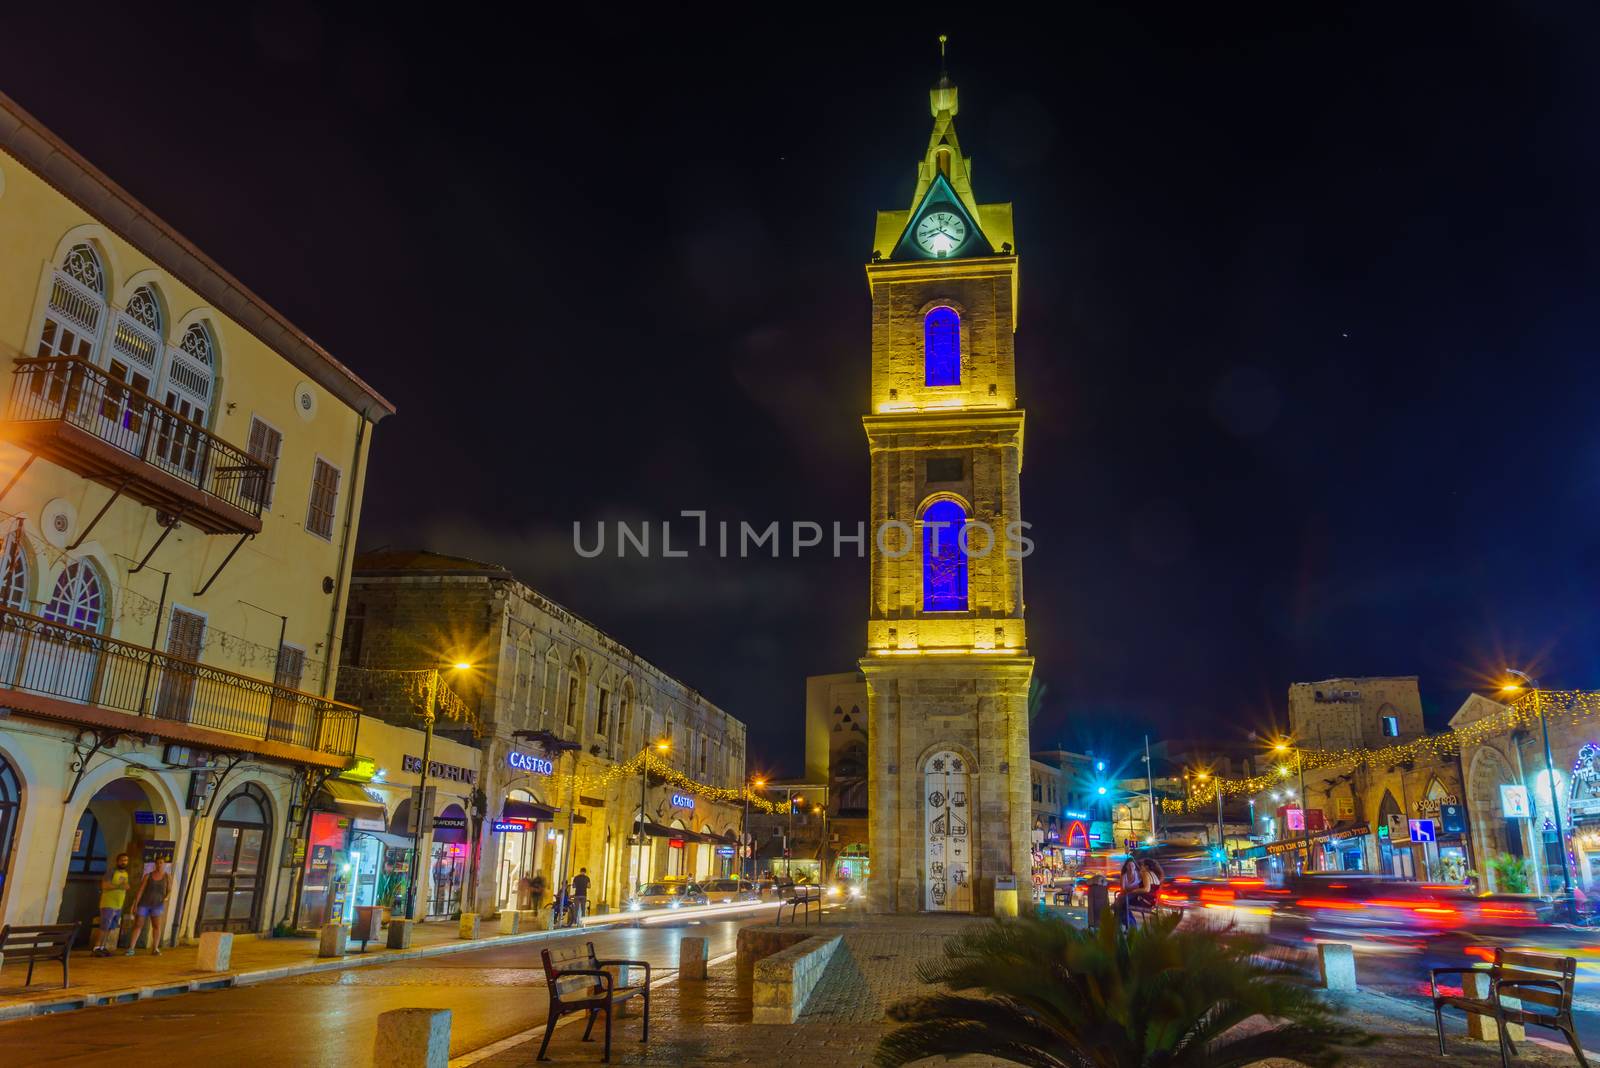 Night view of the Clock tower in Jaffa by RnDmS